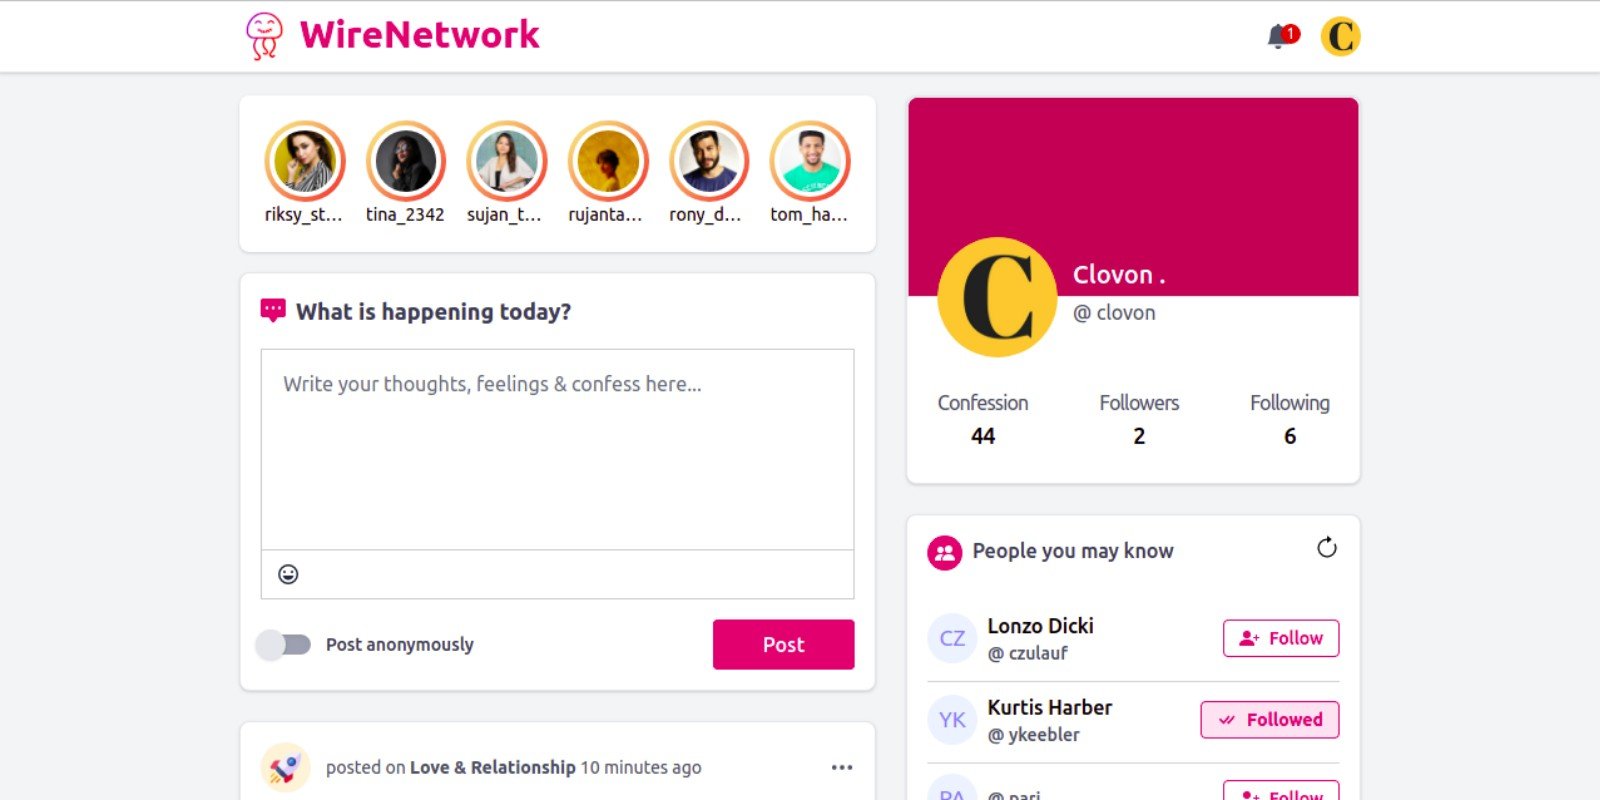 WireNetwork Social Media Networking Platform - PHP Scripts 